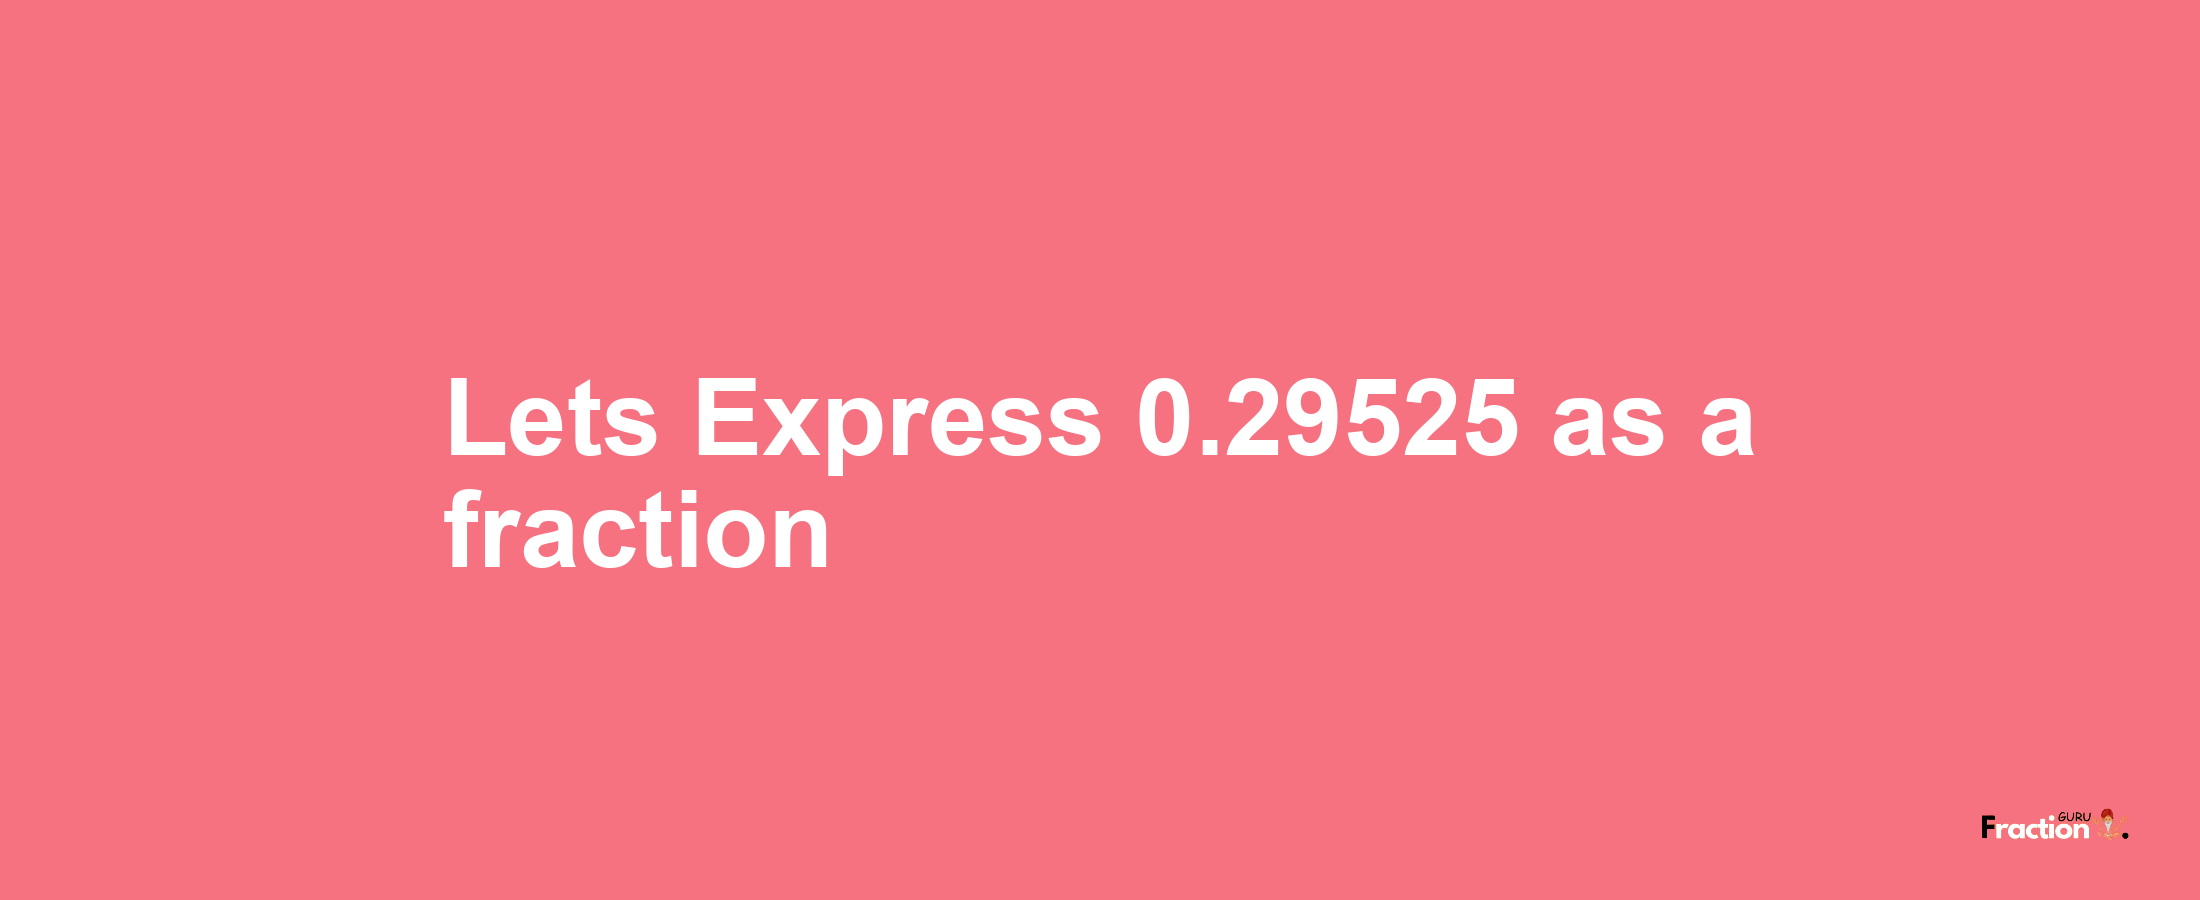 Lets Express 0.29525 as afraction